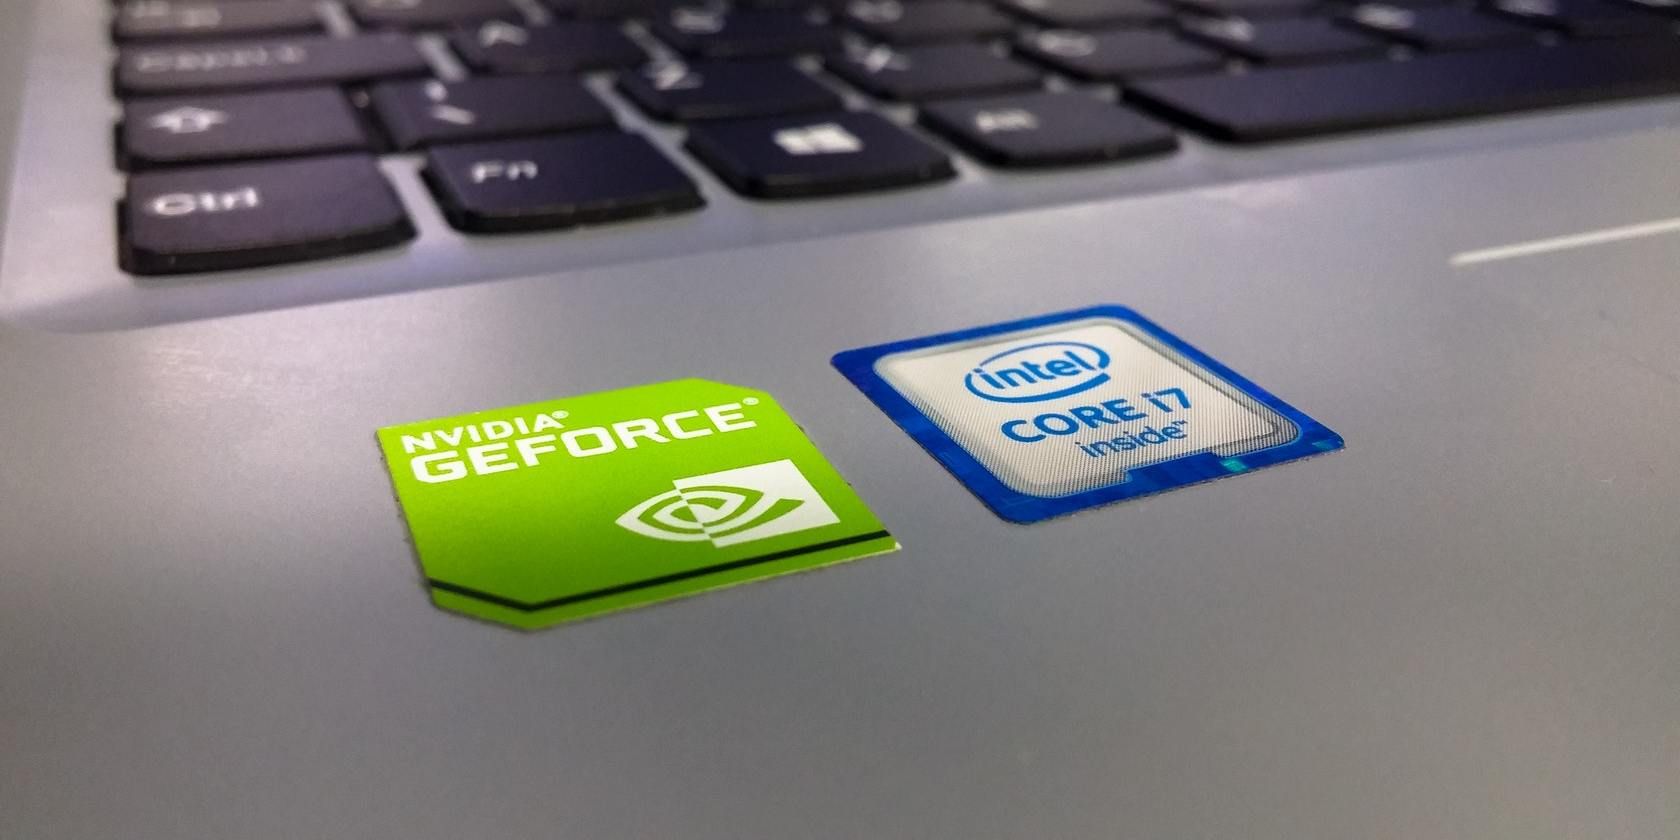 Nvidia GeForce and Intel sticker on a laptop